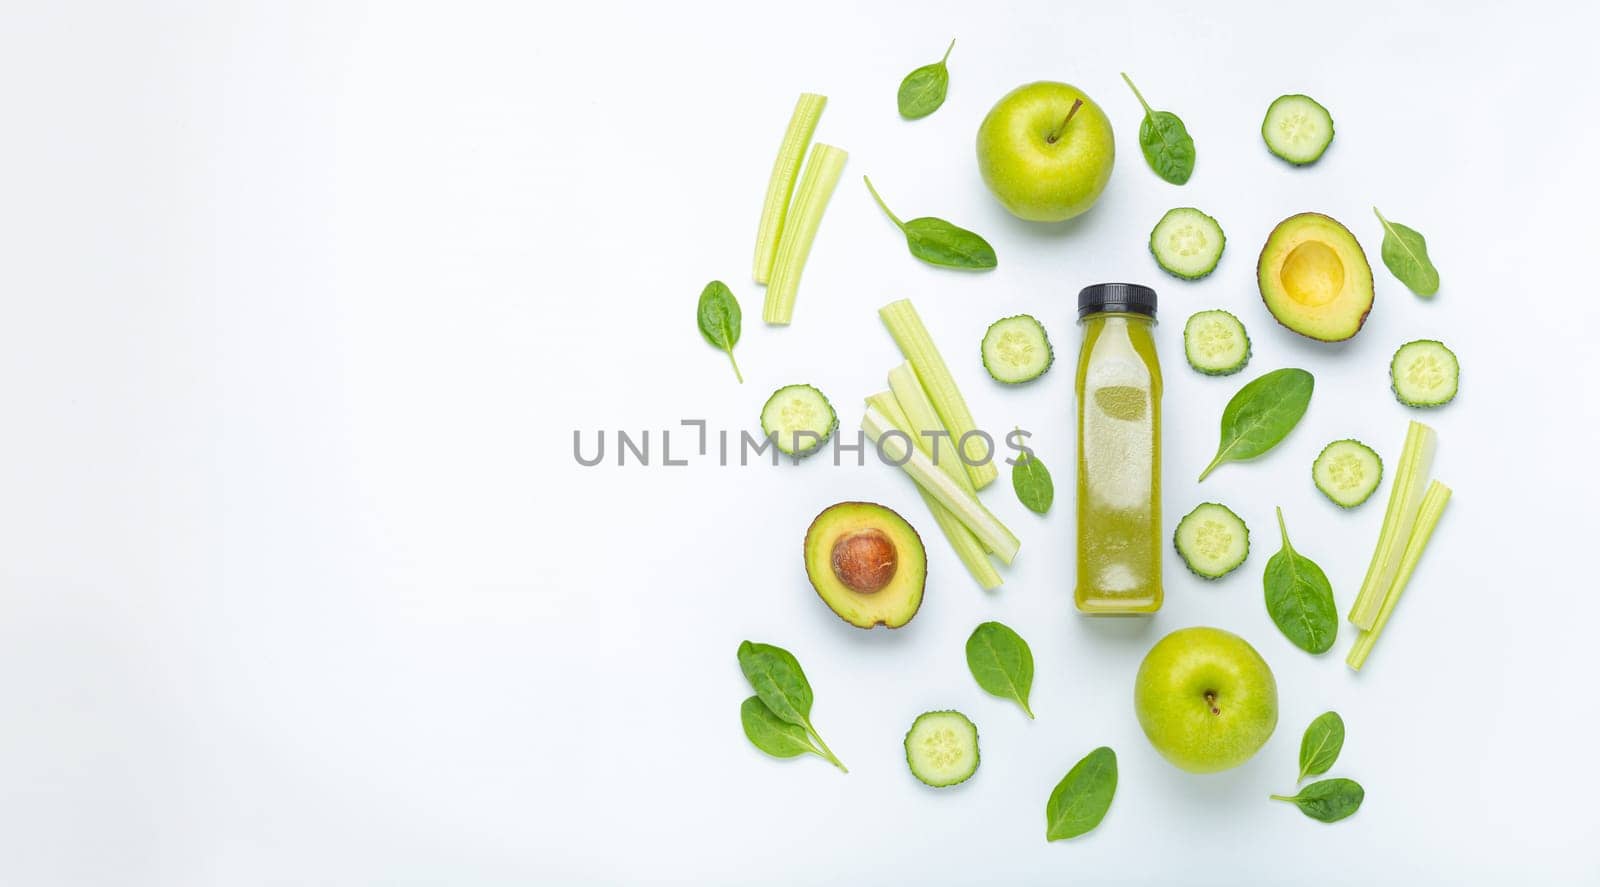 Bottle of green smoothie surrounded by green fruit and vegetables: apples, avocado, spinach, celery, cucumber on white simple background top view. Diet, healthy nutrition, detox, copy space